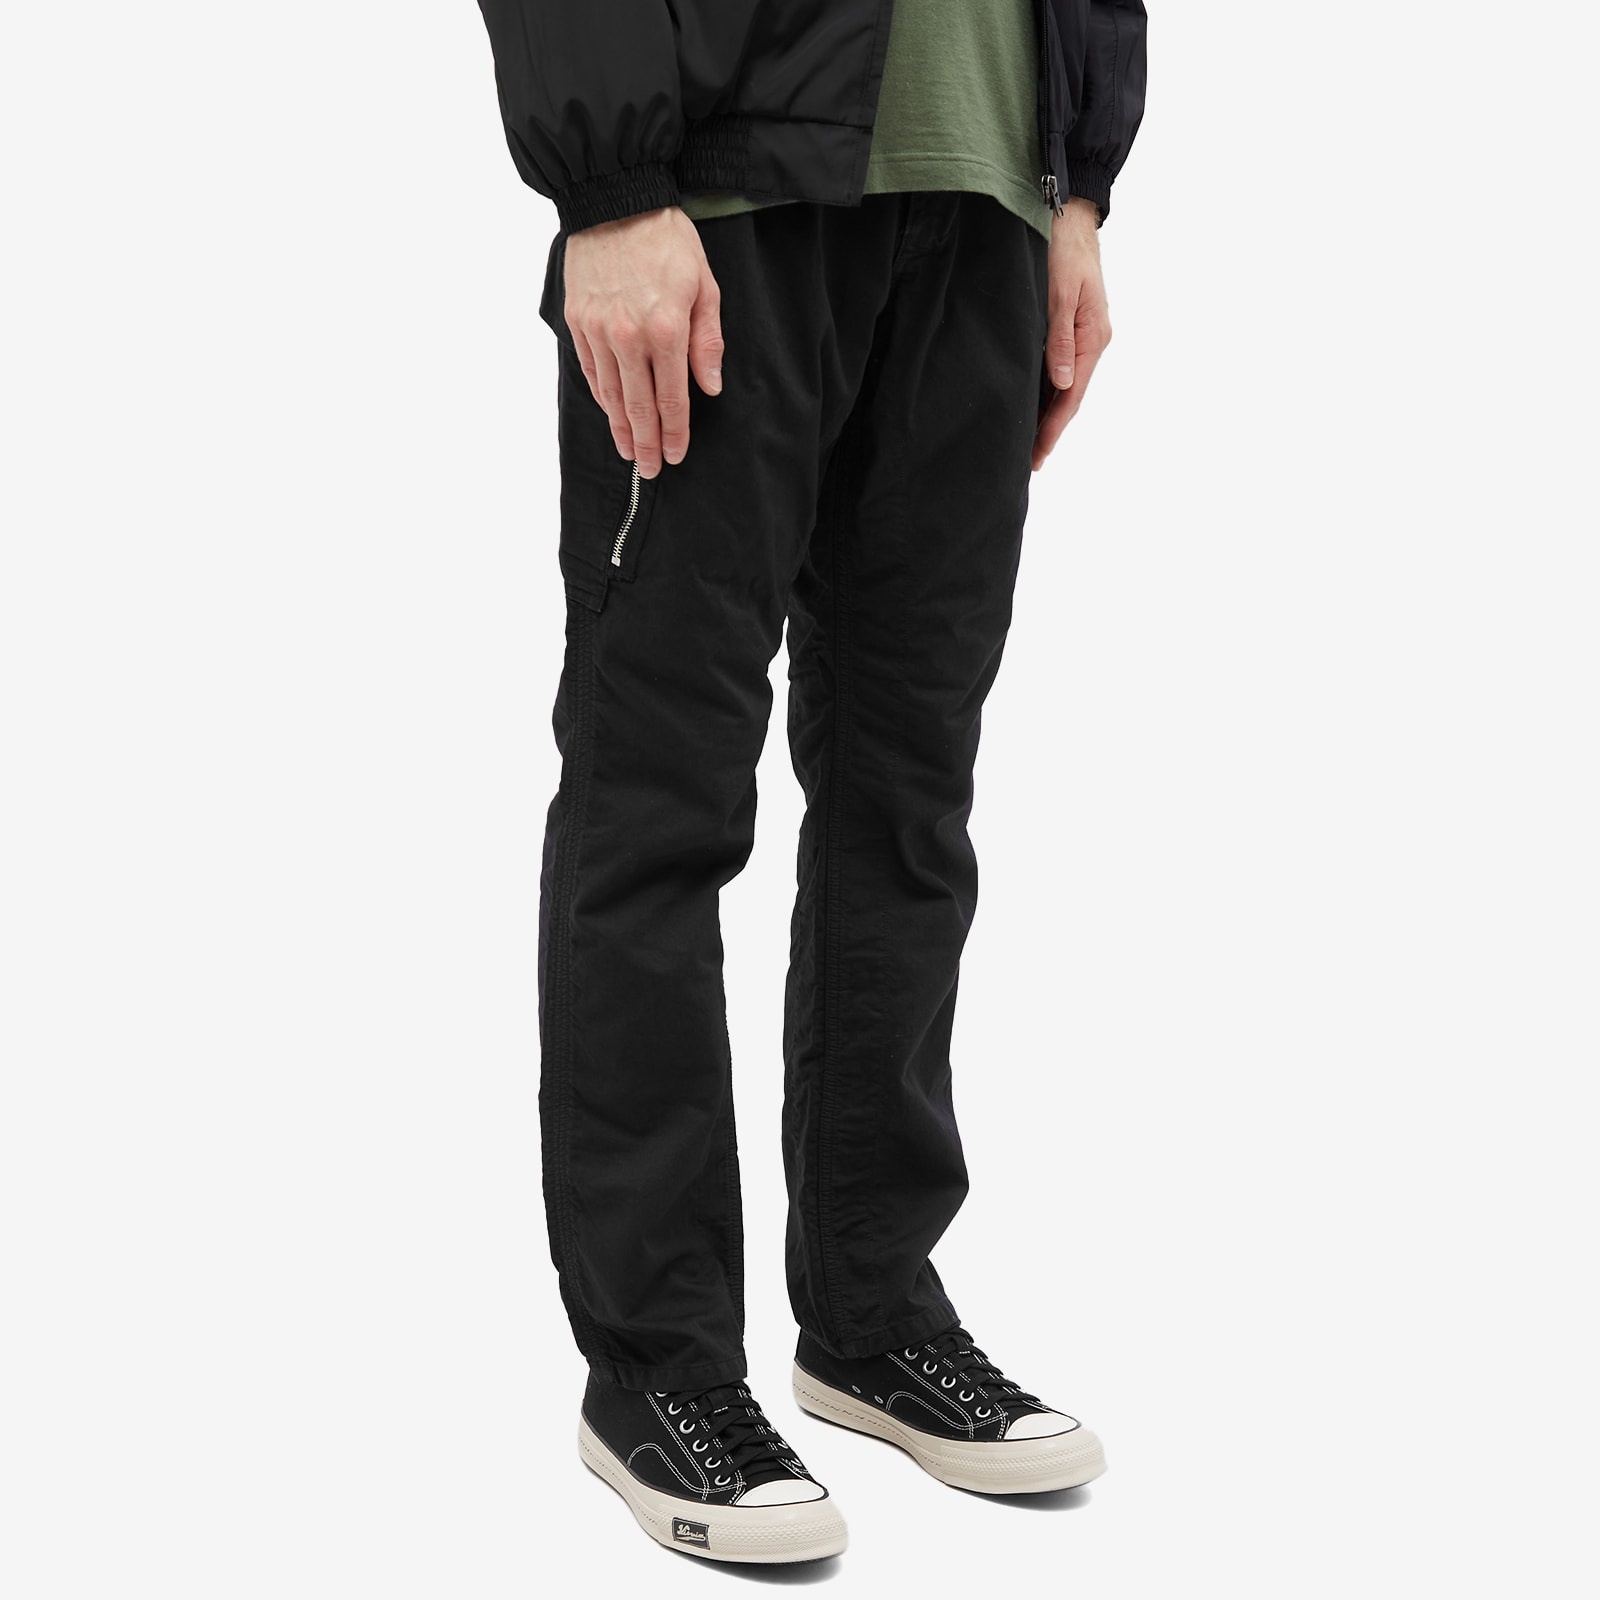 Nonnative Overdyed 6 Pocket Soldier Pants - 2